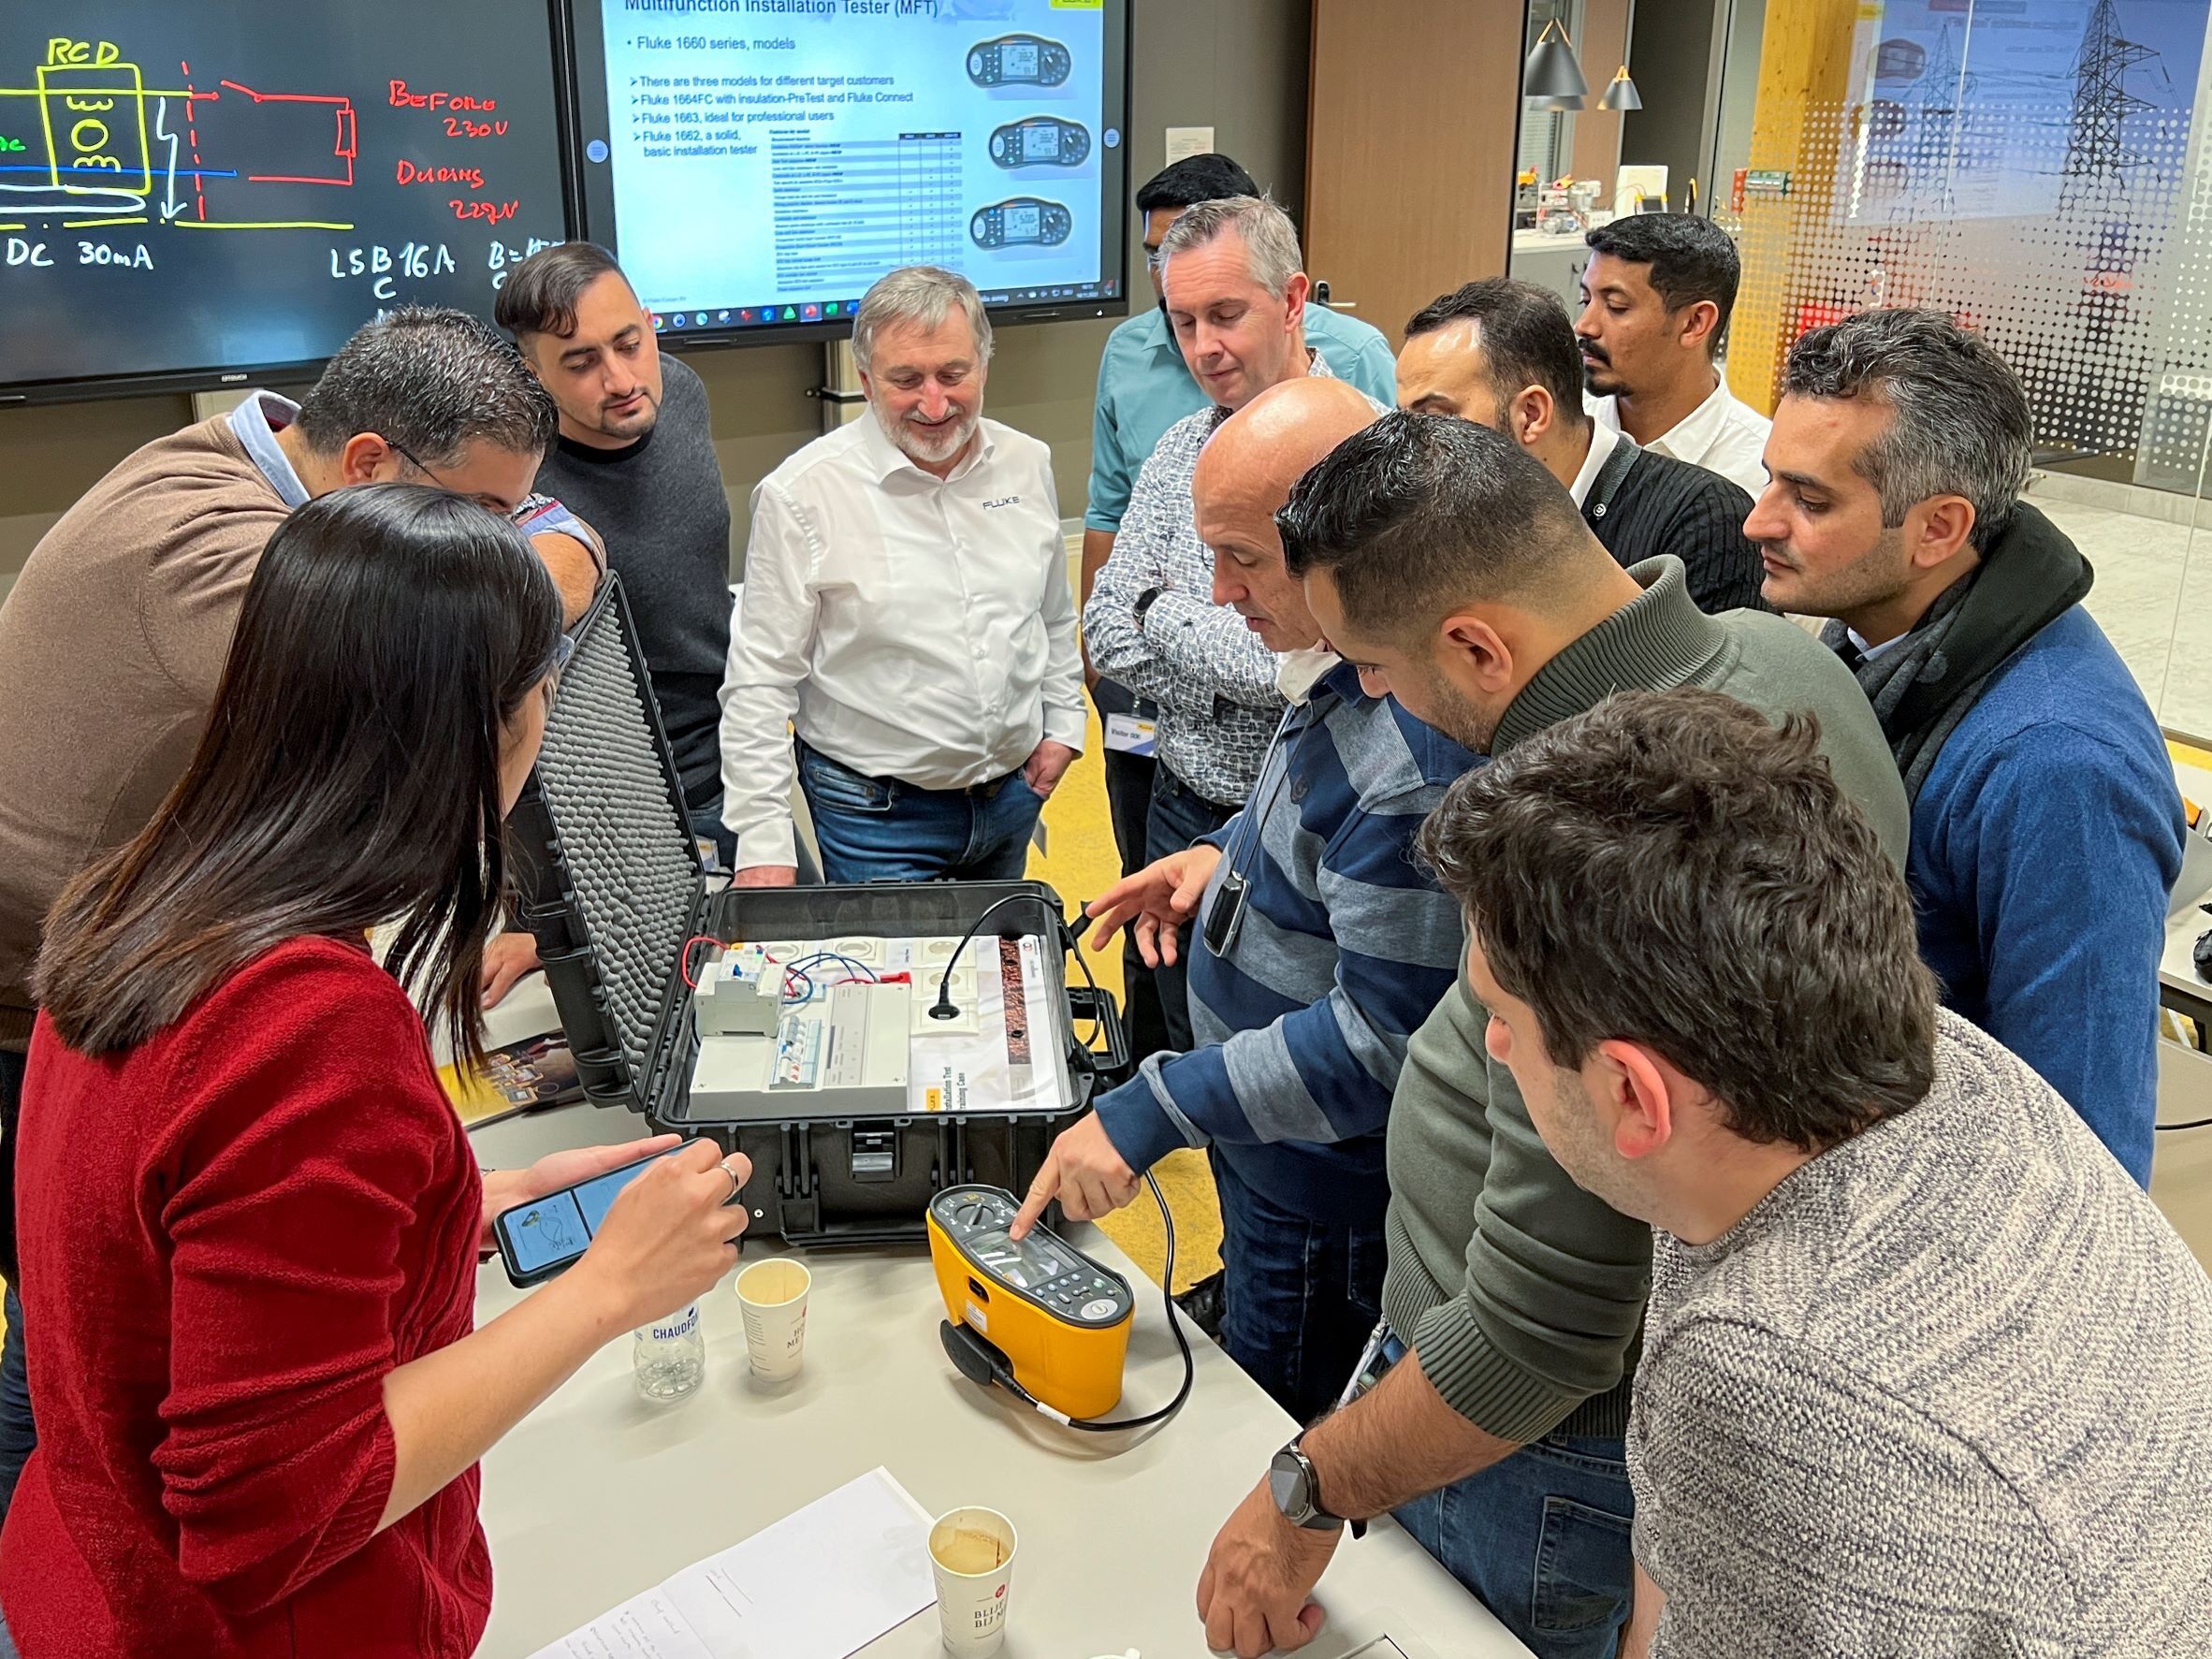 Fluke launches hands-on training courses for electrical installation testers